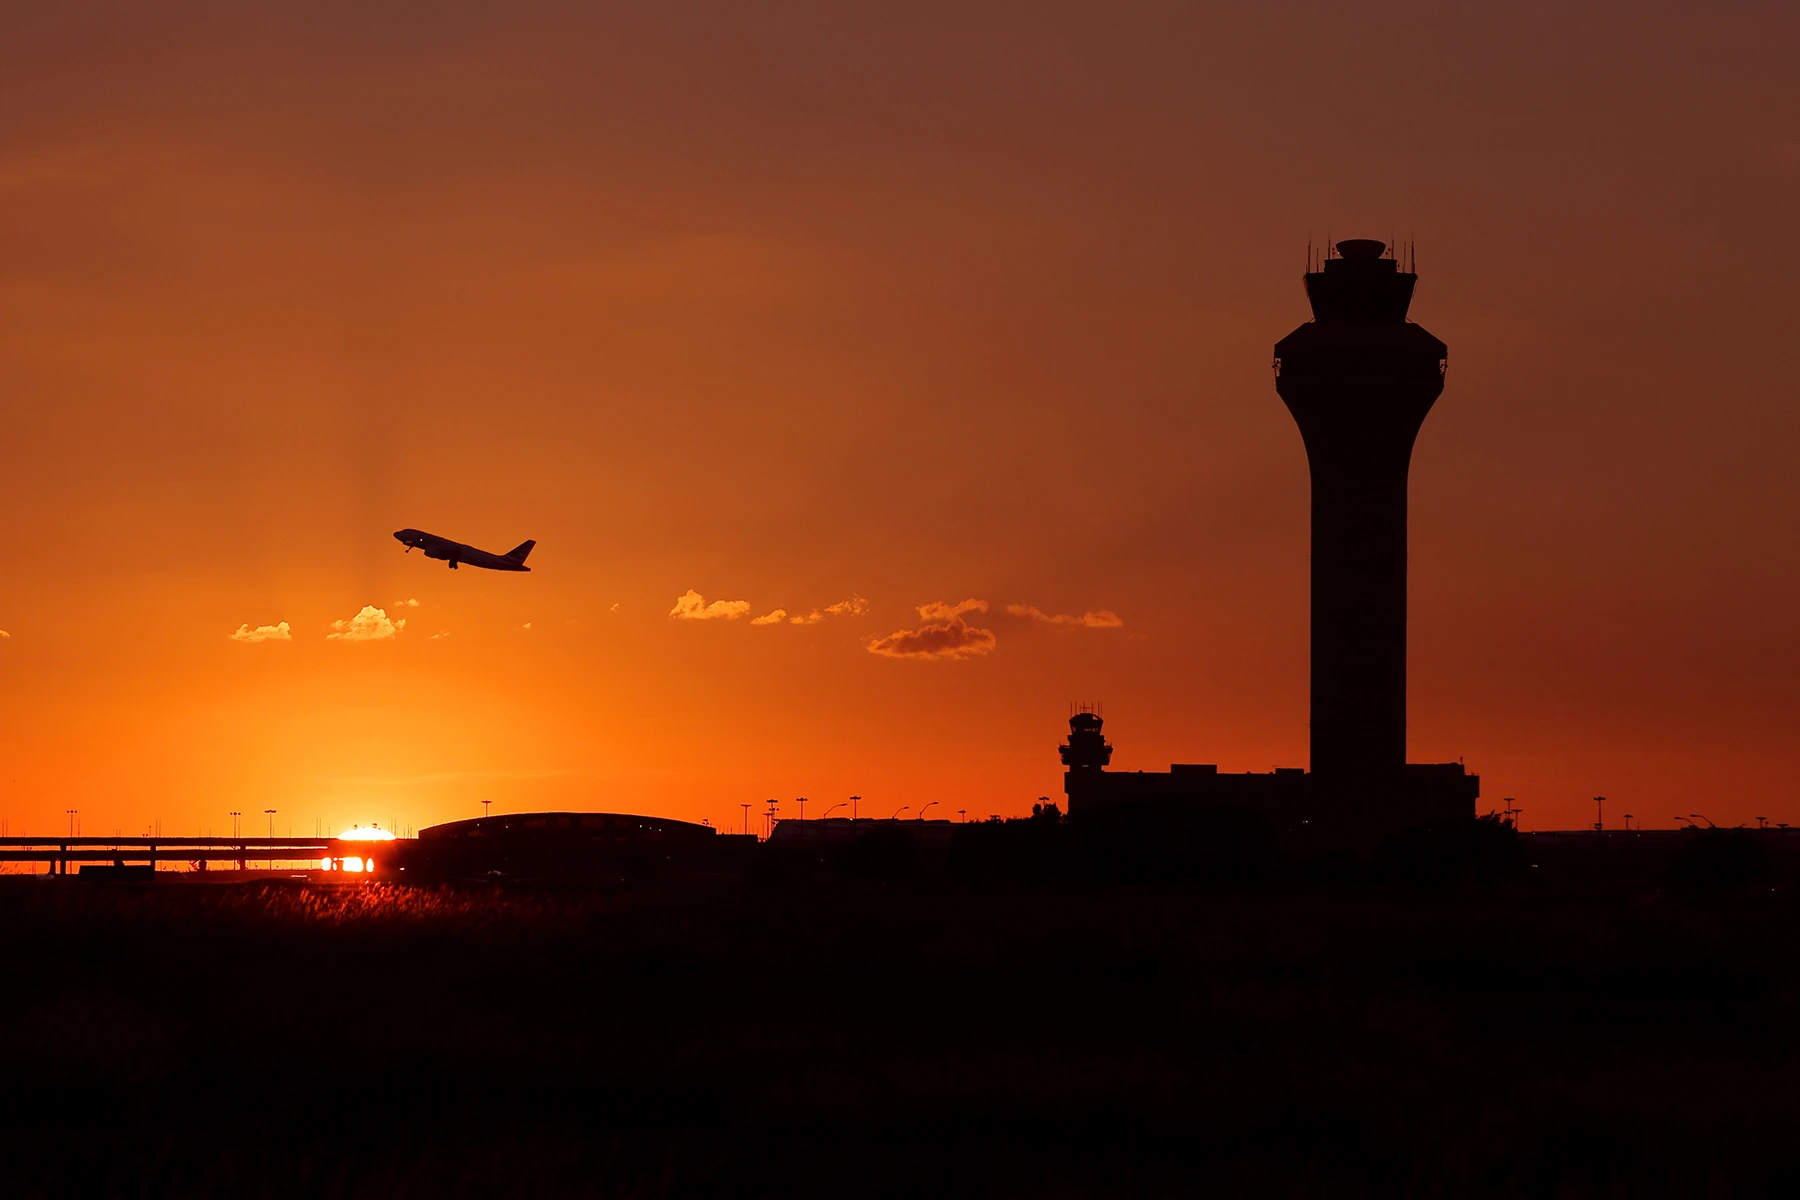 Tower Aircraft Sunset - Home Image